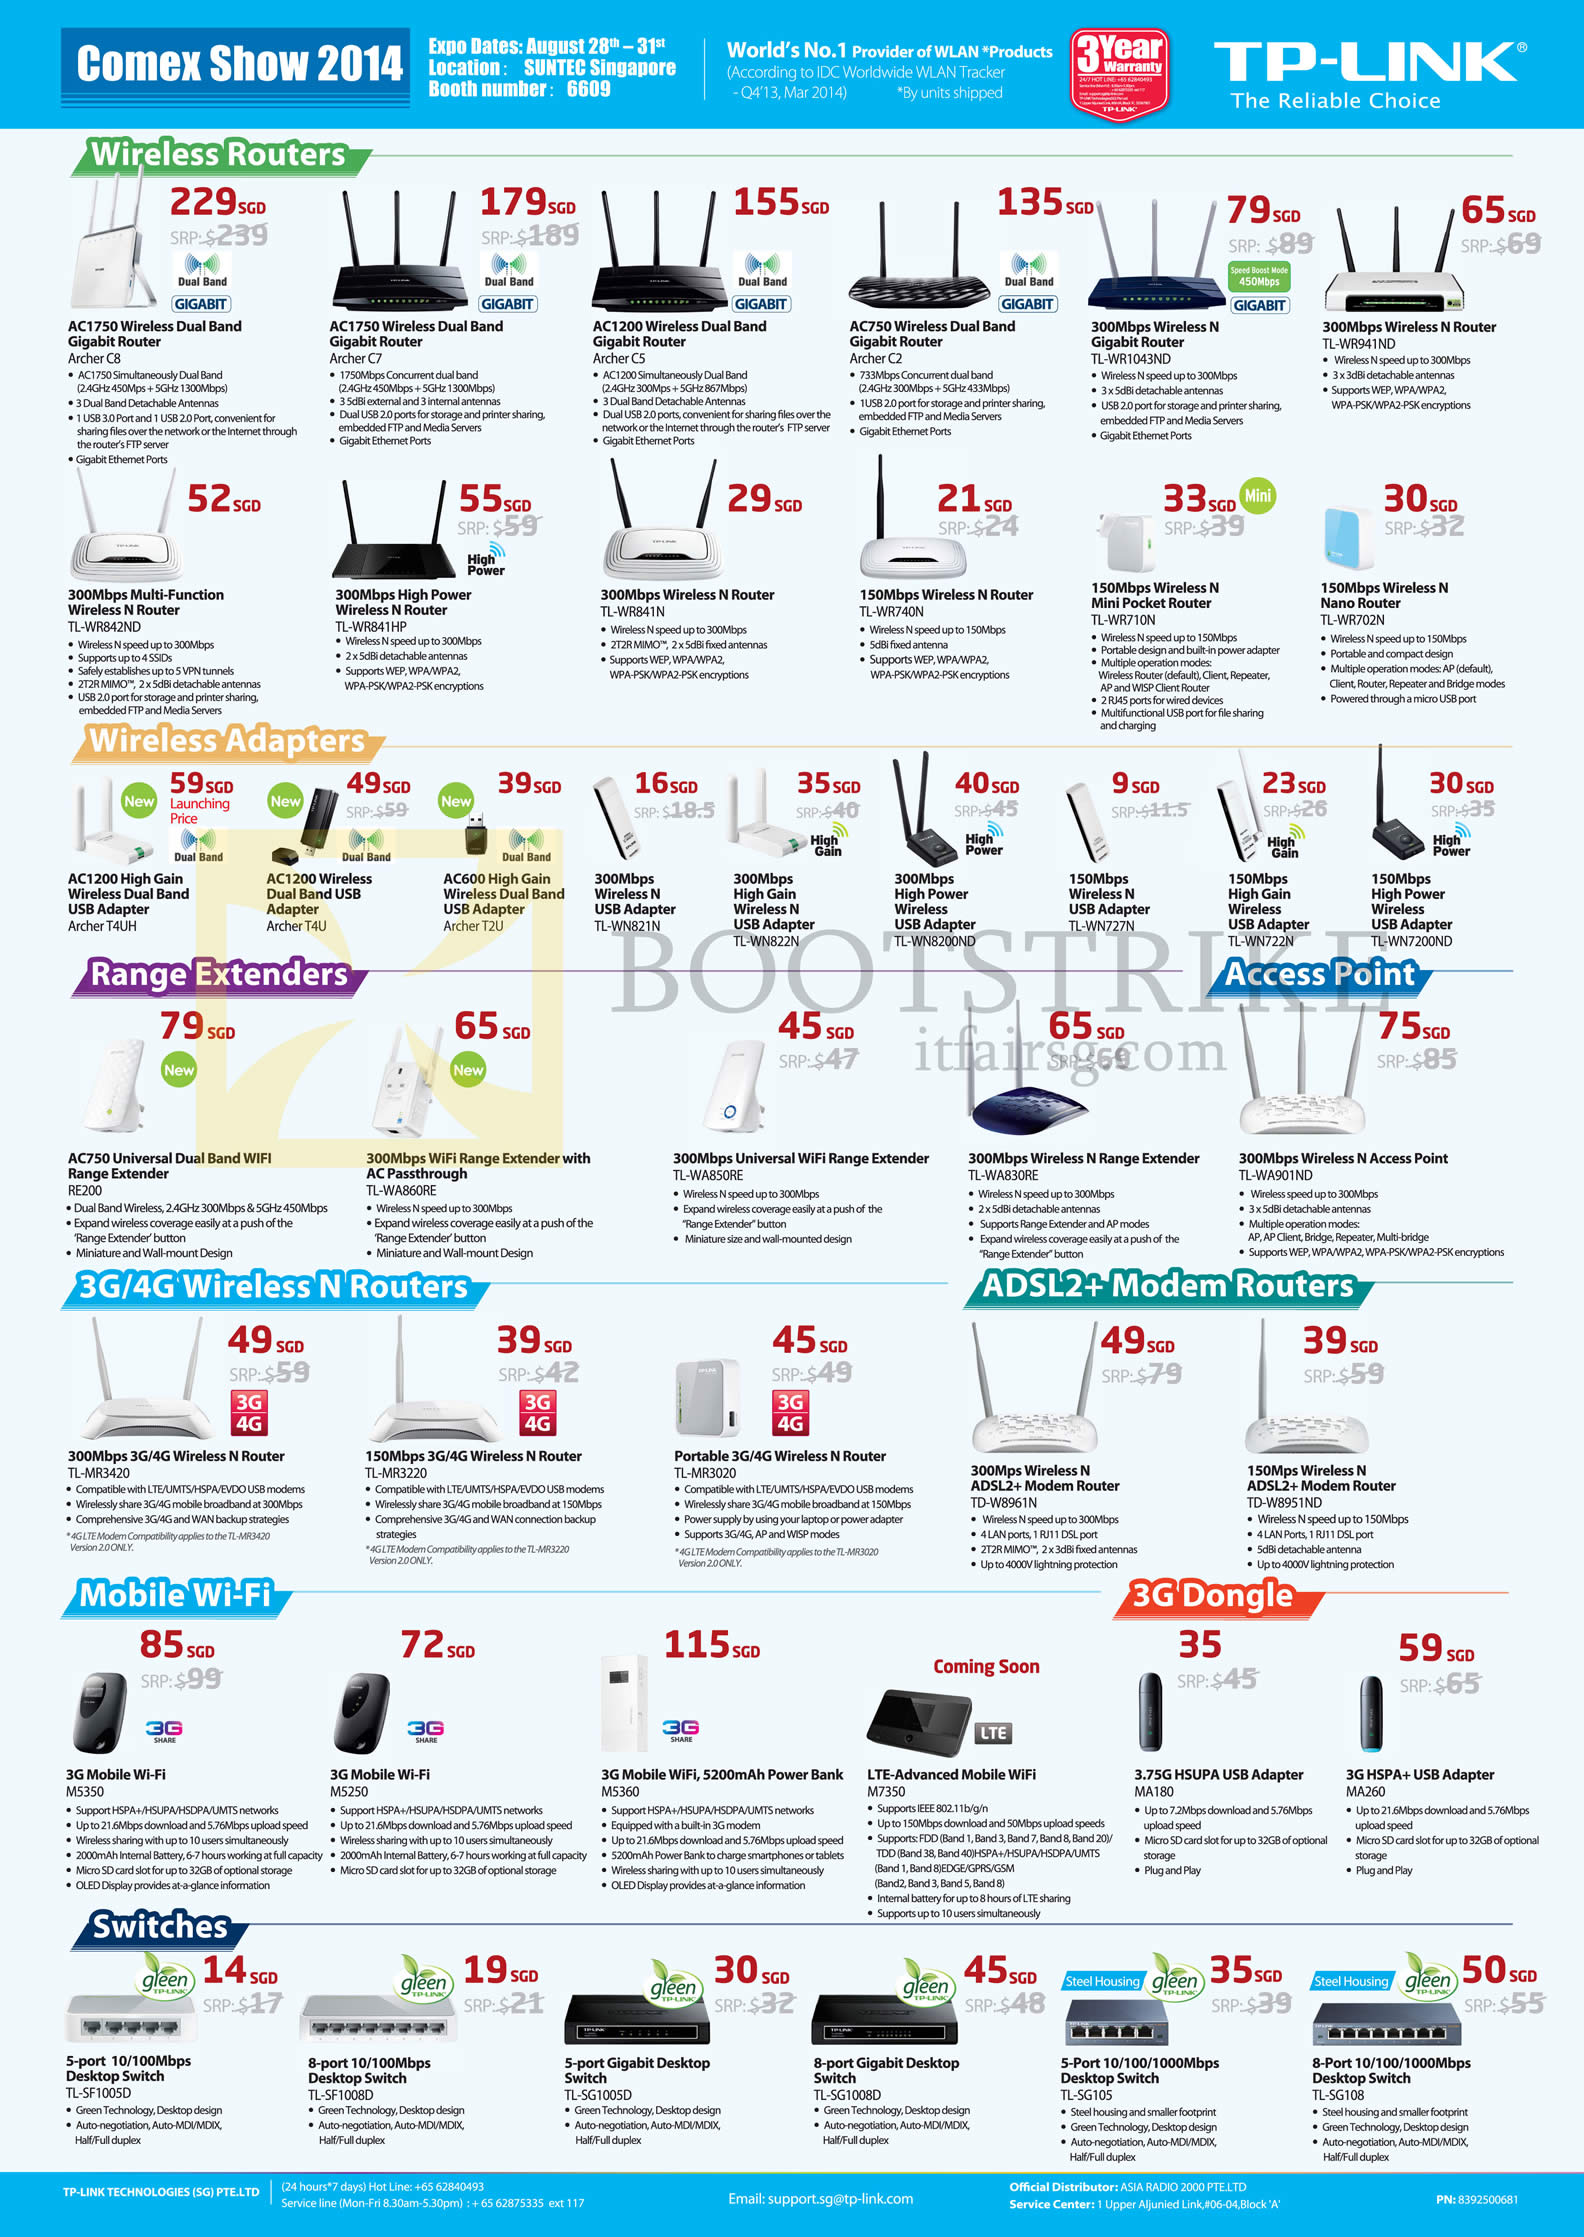 COMEX 2014 price list image brochure of Asia Radio TP-Link Networking Wireless Routers, Adapters USB, Range Extenders, ADSL2 Modem Router, Mobile Wifi 3G 3.75G 4G, Switches